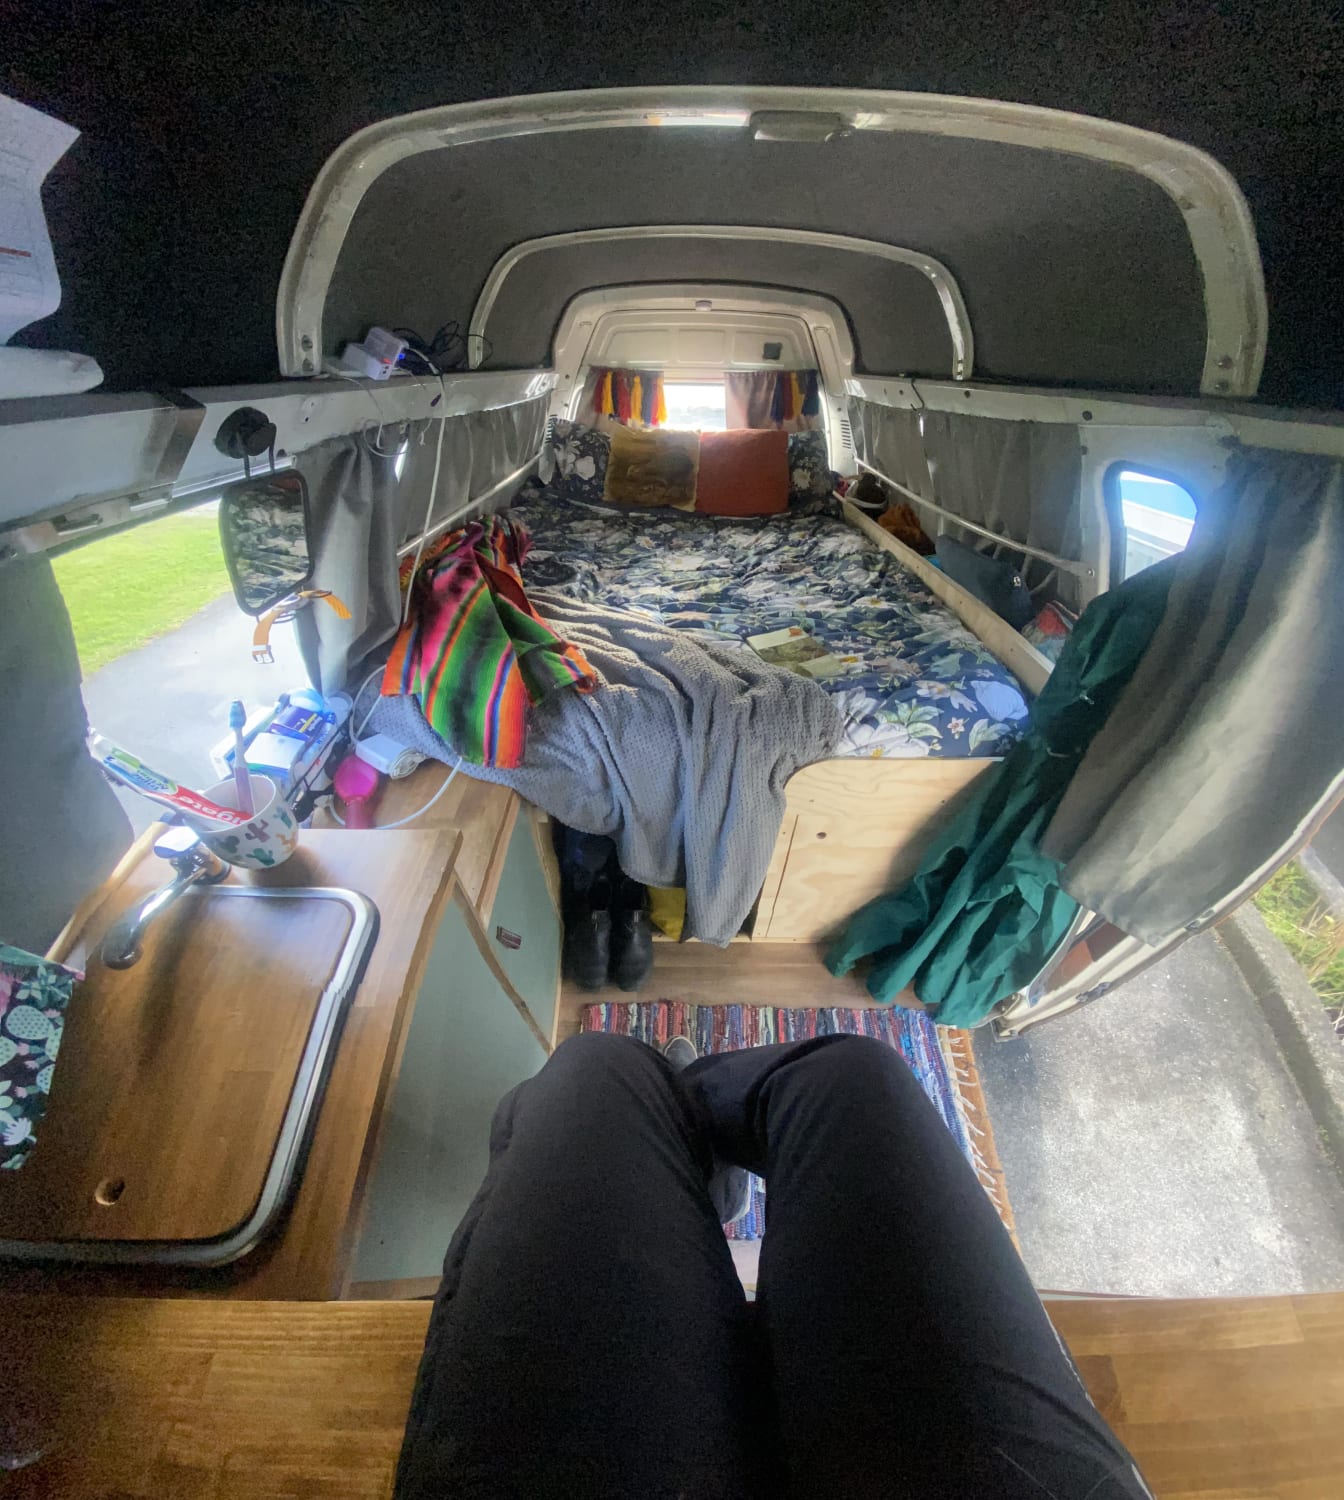 We’ve suddenly found ourselves homeless so we didn’t get to finish it properly, but after a week of van living I’d say we’ve done a good job.